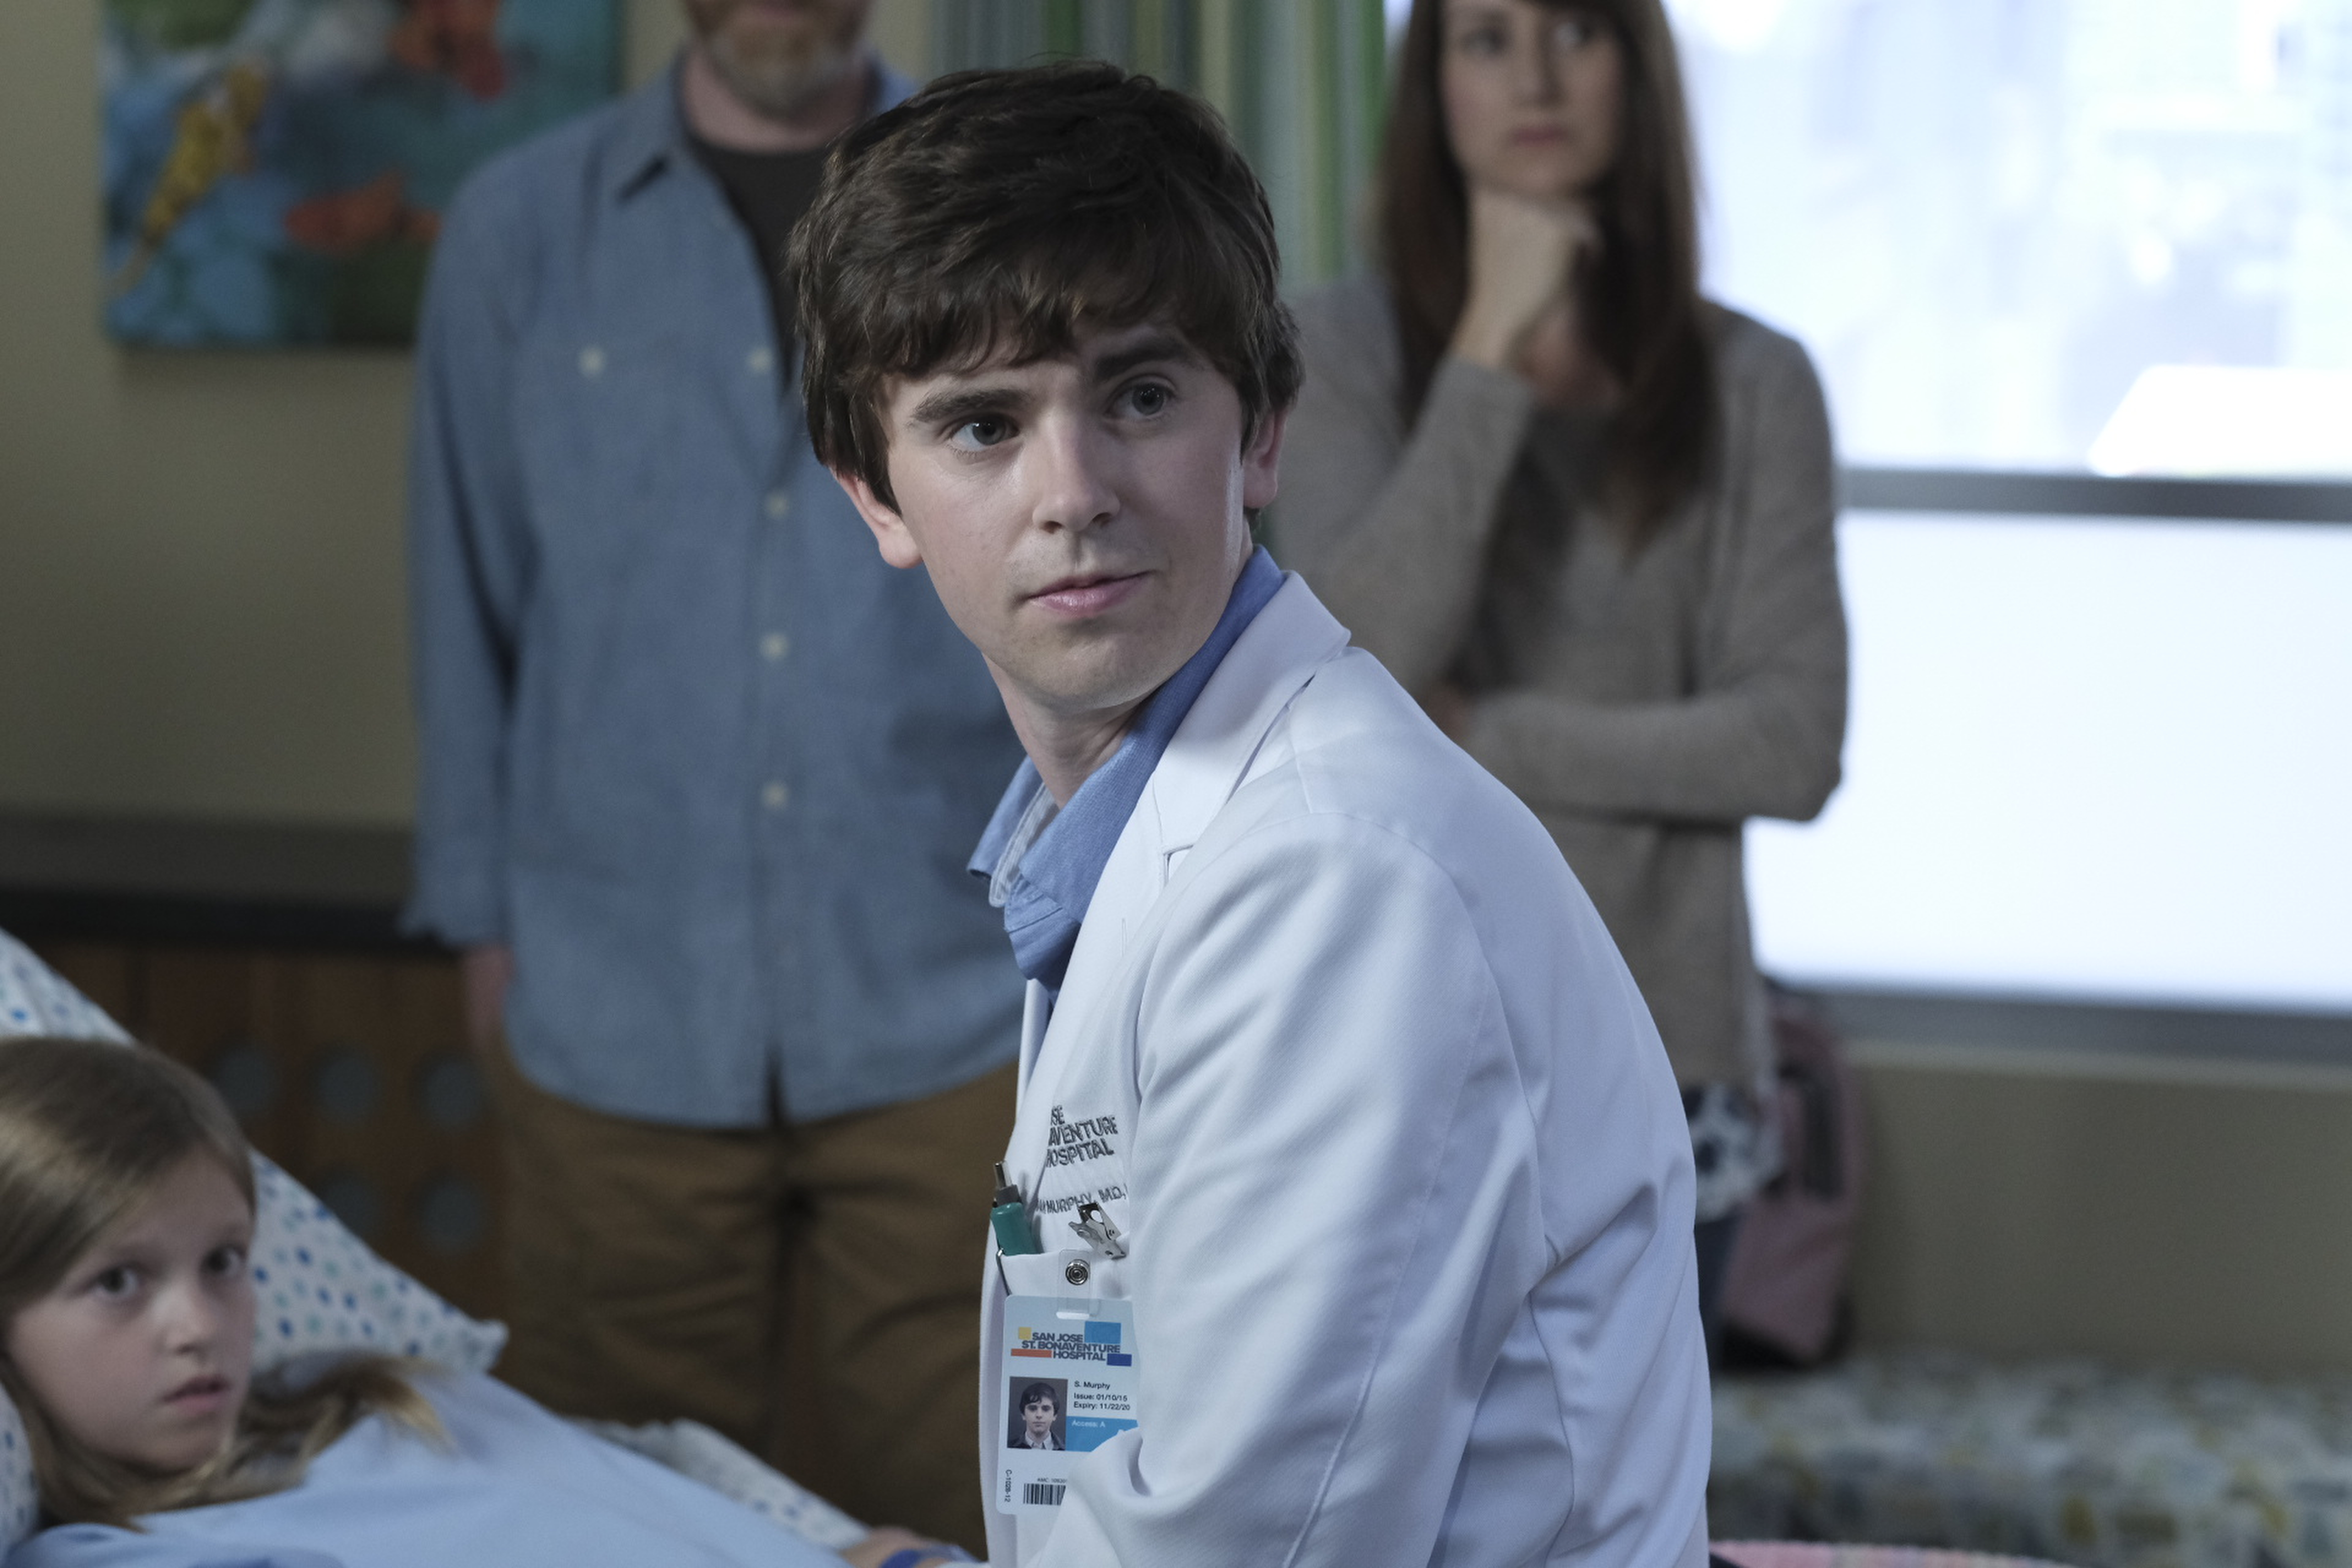 The Good Doctor: Forget McDreamy, introducing McBrilliant – the new surgeon in town